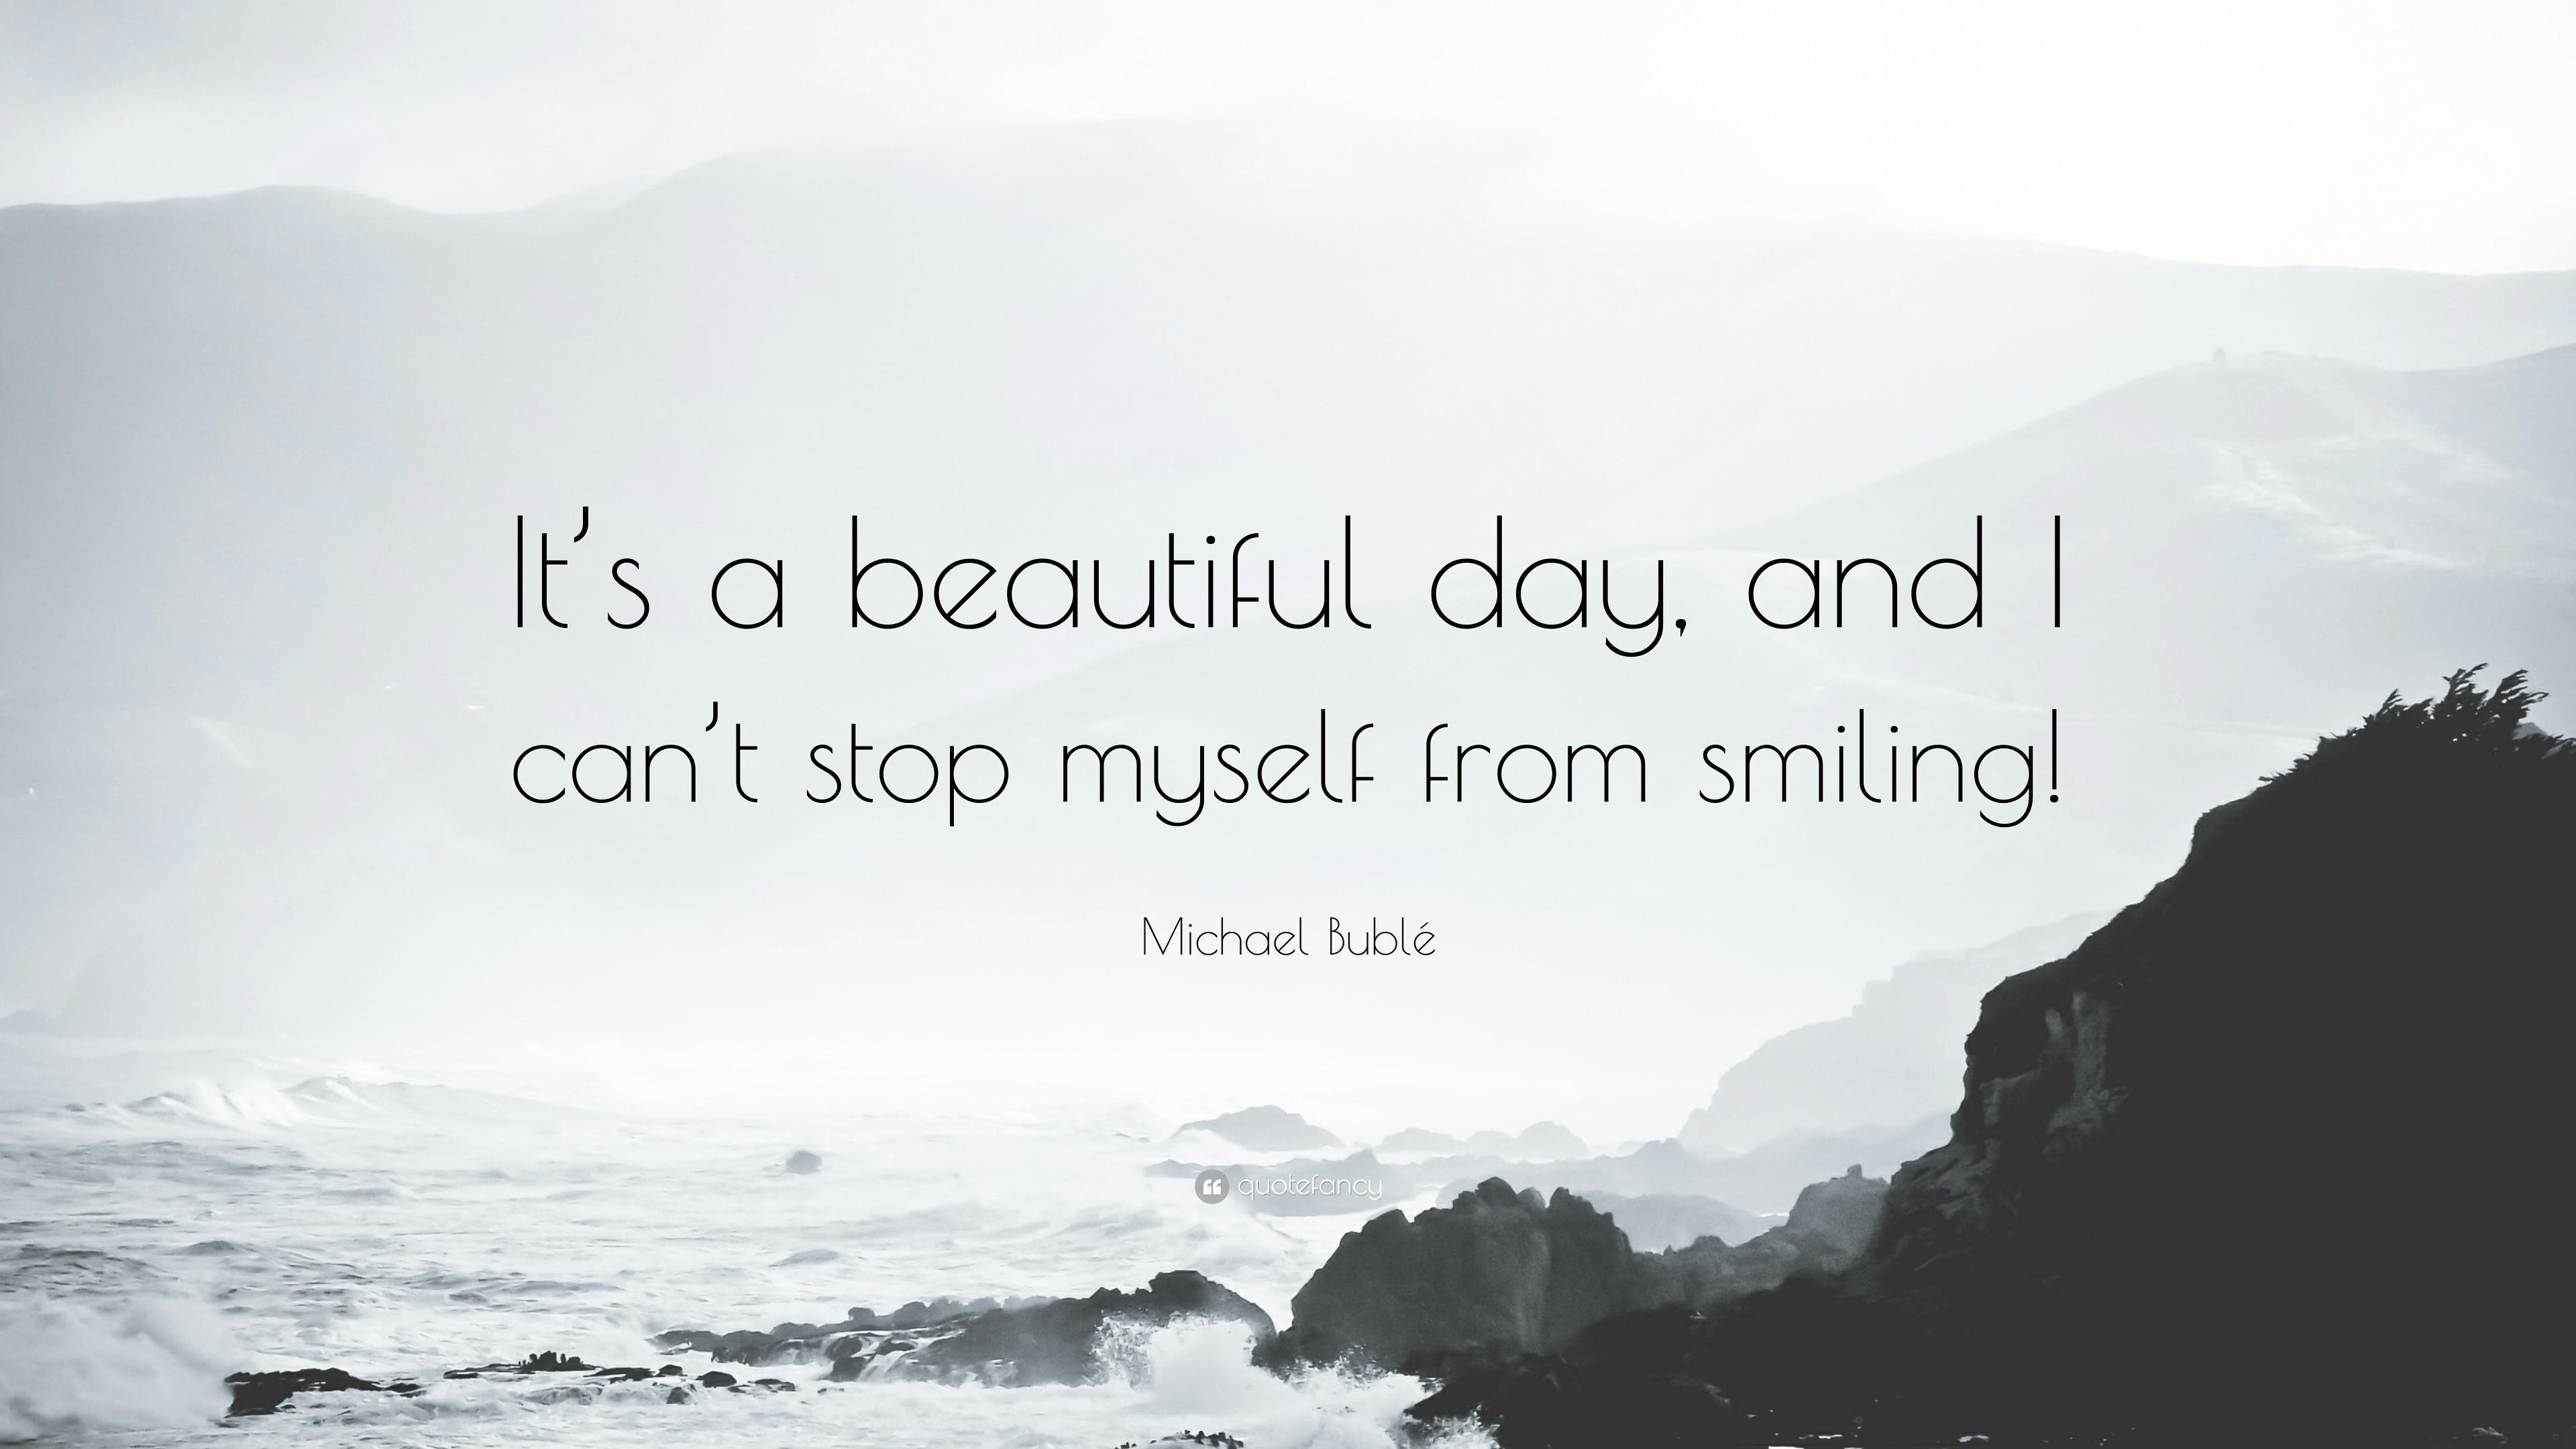 Michael Bublé Quote: “It's a beautiful day, and I can't stop